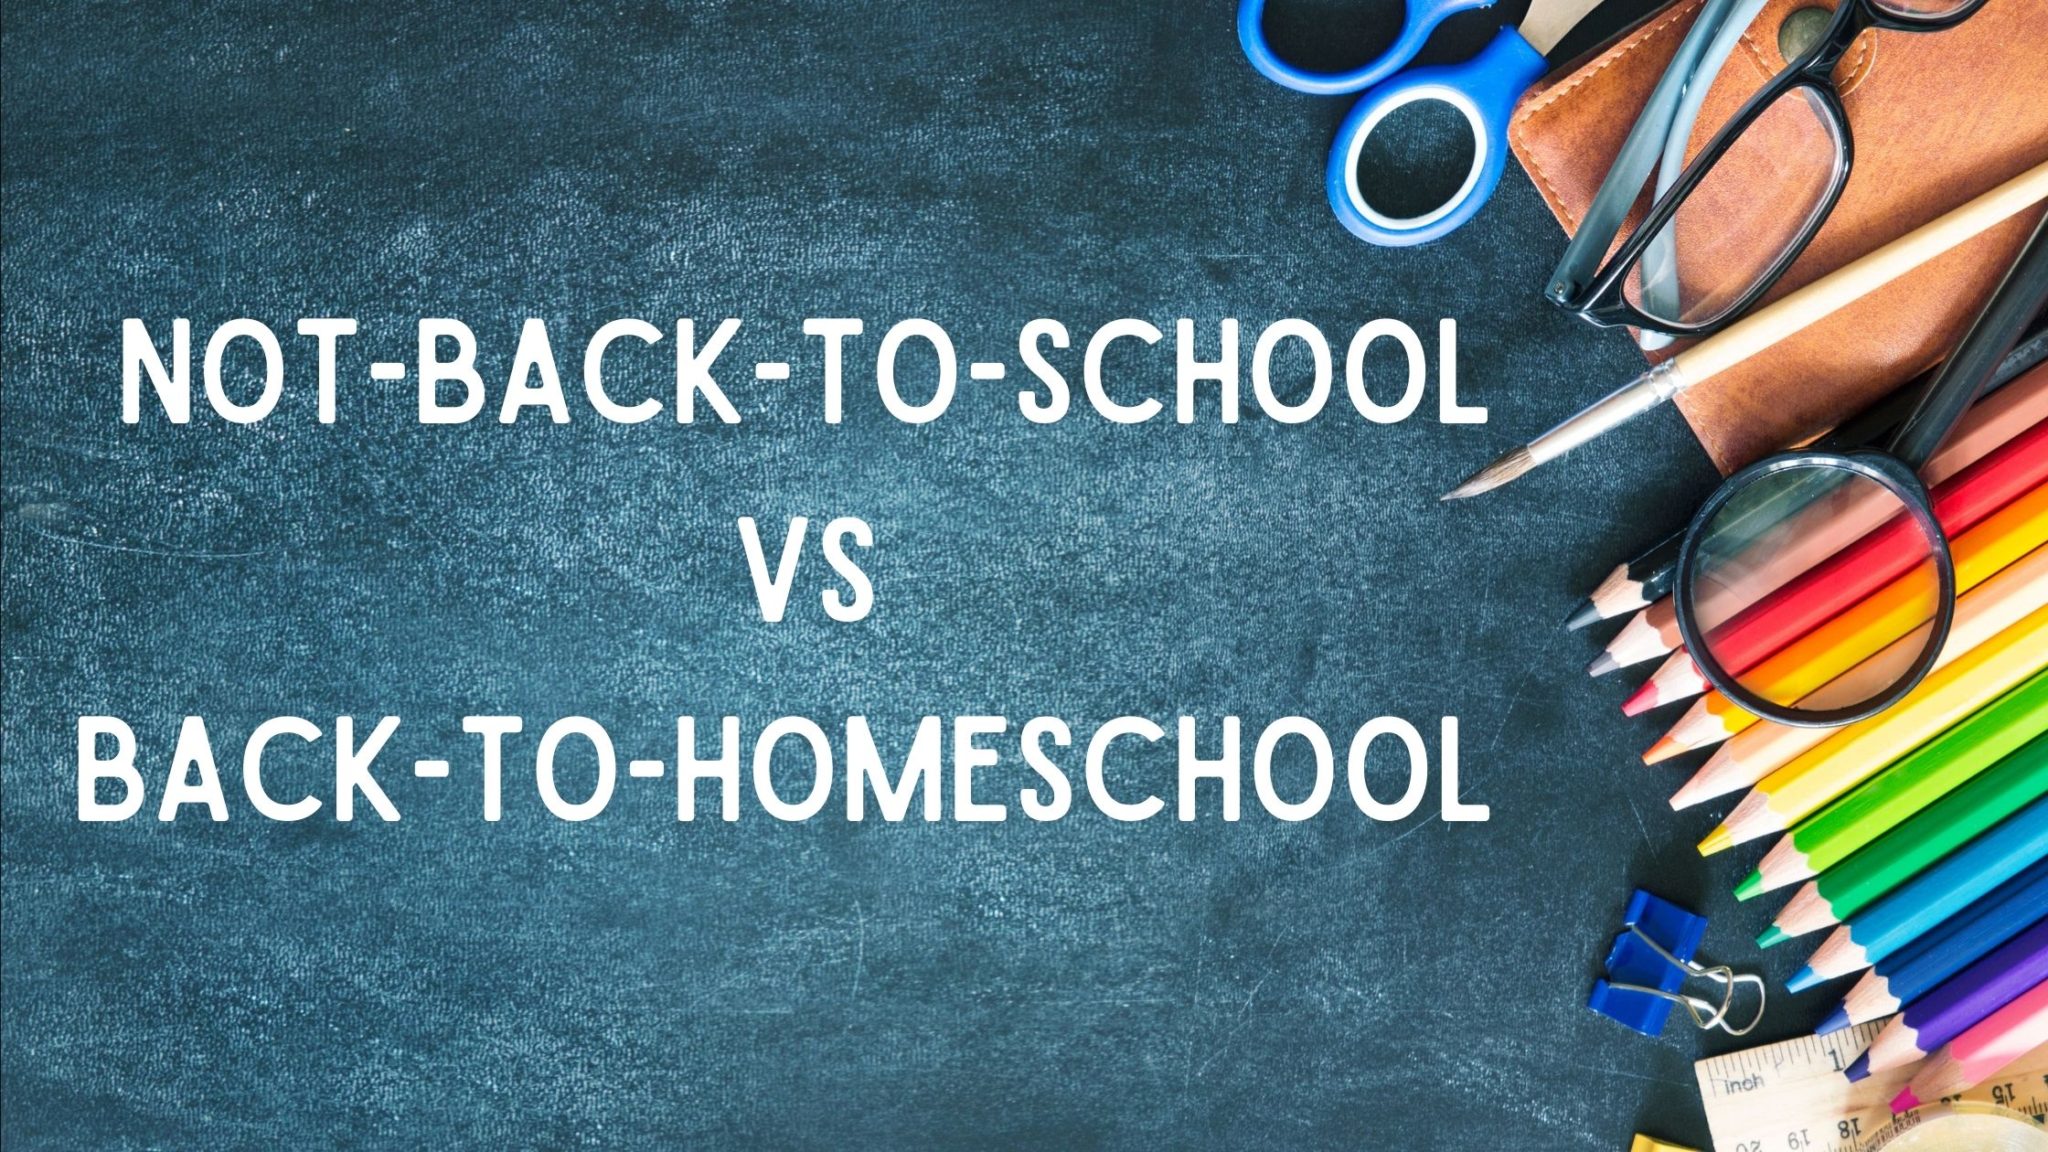 You are currently viewing Celebrating Not-Back-School vs. Back-to-Homeschool